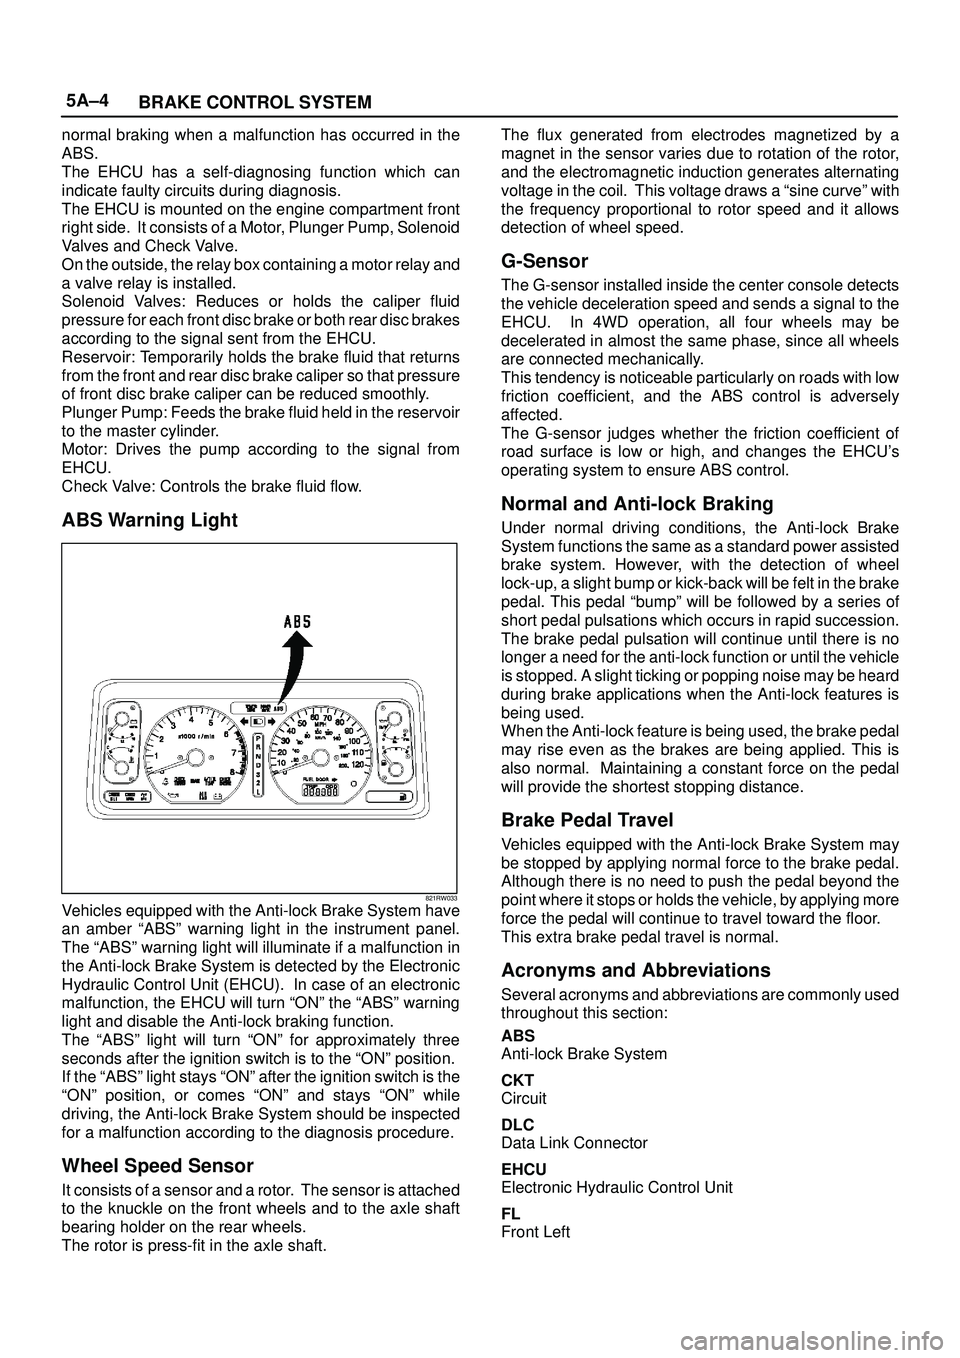 ISUZU TROOPER 1998  Service User Guide 5A±4
BRAKE CONTROL SYSTEM
normal braking when a malfunction has occurred in the
ABS.
The EHCU has a self-diagnosing function which can
indicate faulty circuits during diagnosis.
The EHCU is mounted o